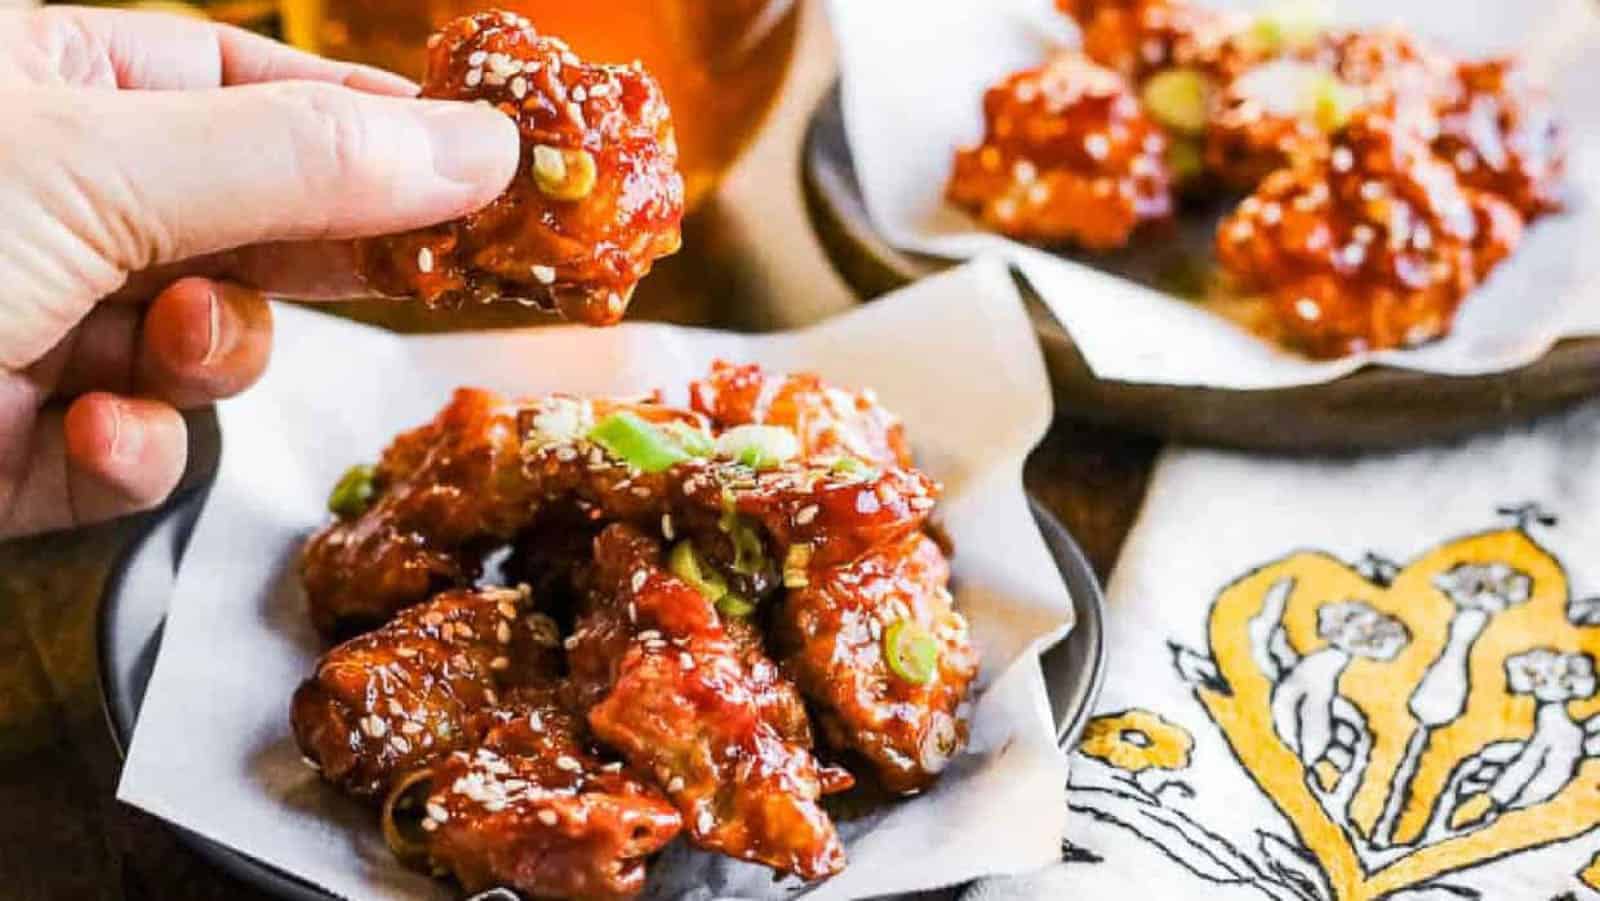 <p>Make no mistake, Air Fryer Korean Fried Chicken is a delight. Not only it is easy to prepare and tastes amazing, but it will also make your neighbors wonder what your secret is. The combination of the chicken’s crisp outer layer and juicy inside will leave everyone wanting more!<br><strong>Get the Recipe: </strong><a href="https://allwaysdelicious.com/air-fryer-korean-fried-chicken/?utm_source=msn&utm_medium=page&utm_campaign=msn">Air Fryer Korean Fried Chicken</a></p>